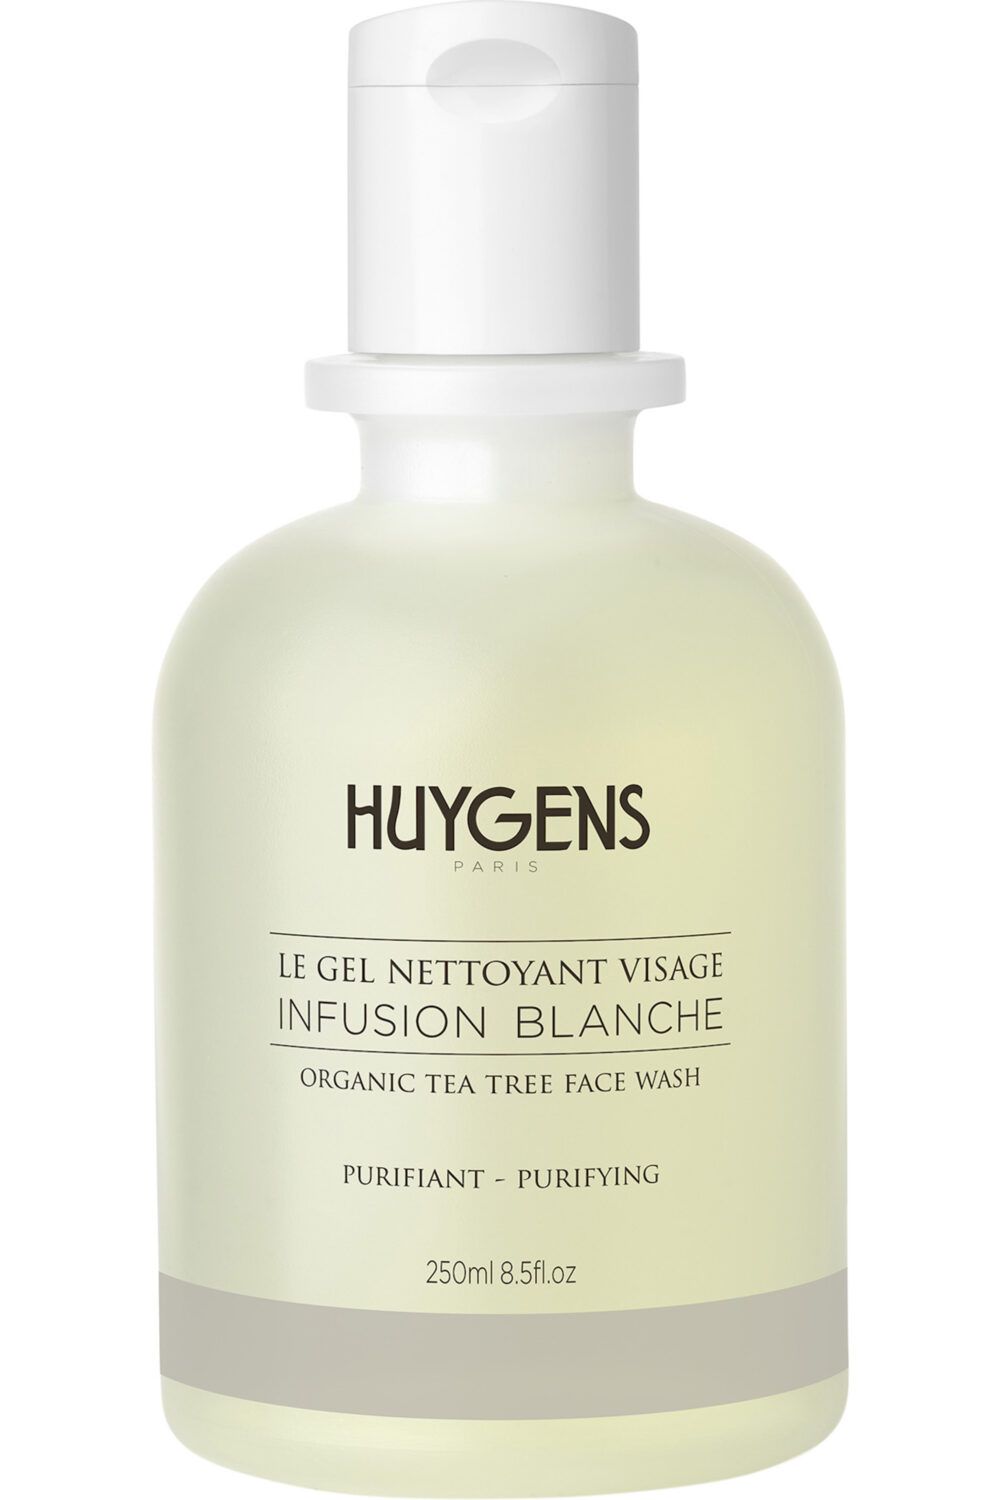 Huygens - Gel nettoyant visage purifant Infusion Blanche 250mL